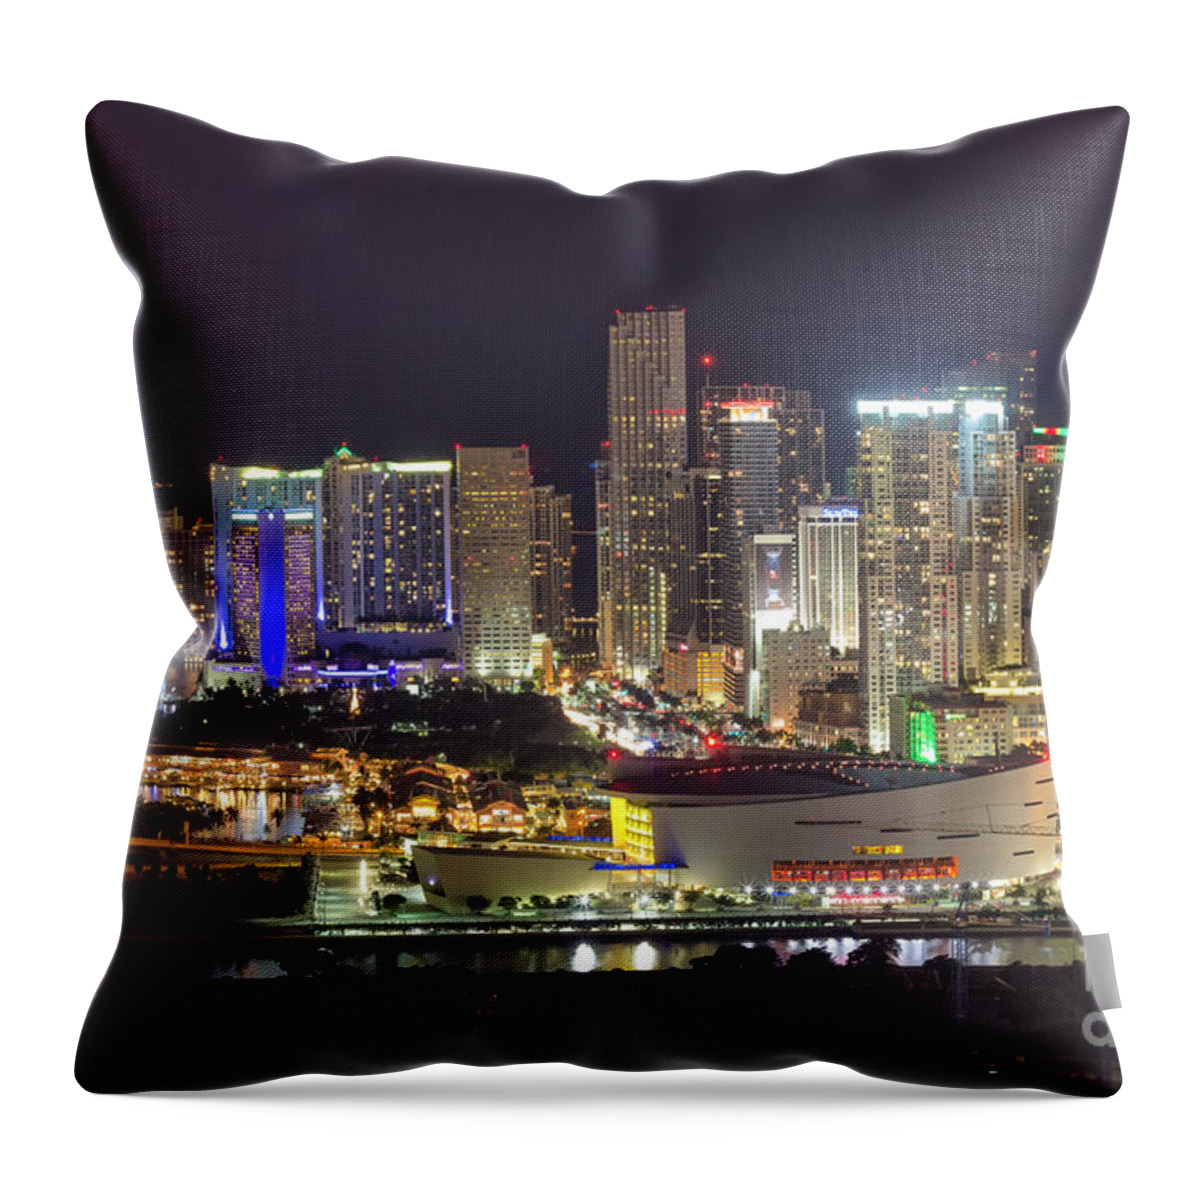 Architecture Throw Pillow featuring the photograph Miami Downtown Skyline American Airlines Arena by Rene Triay FineArt Photos